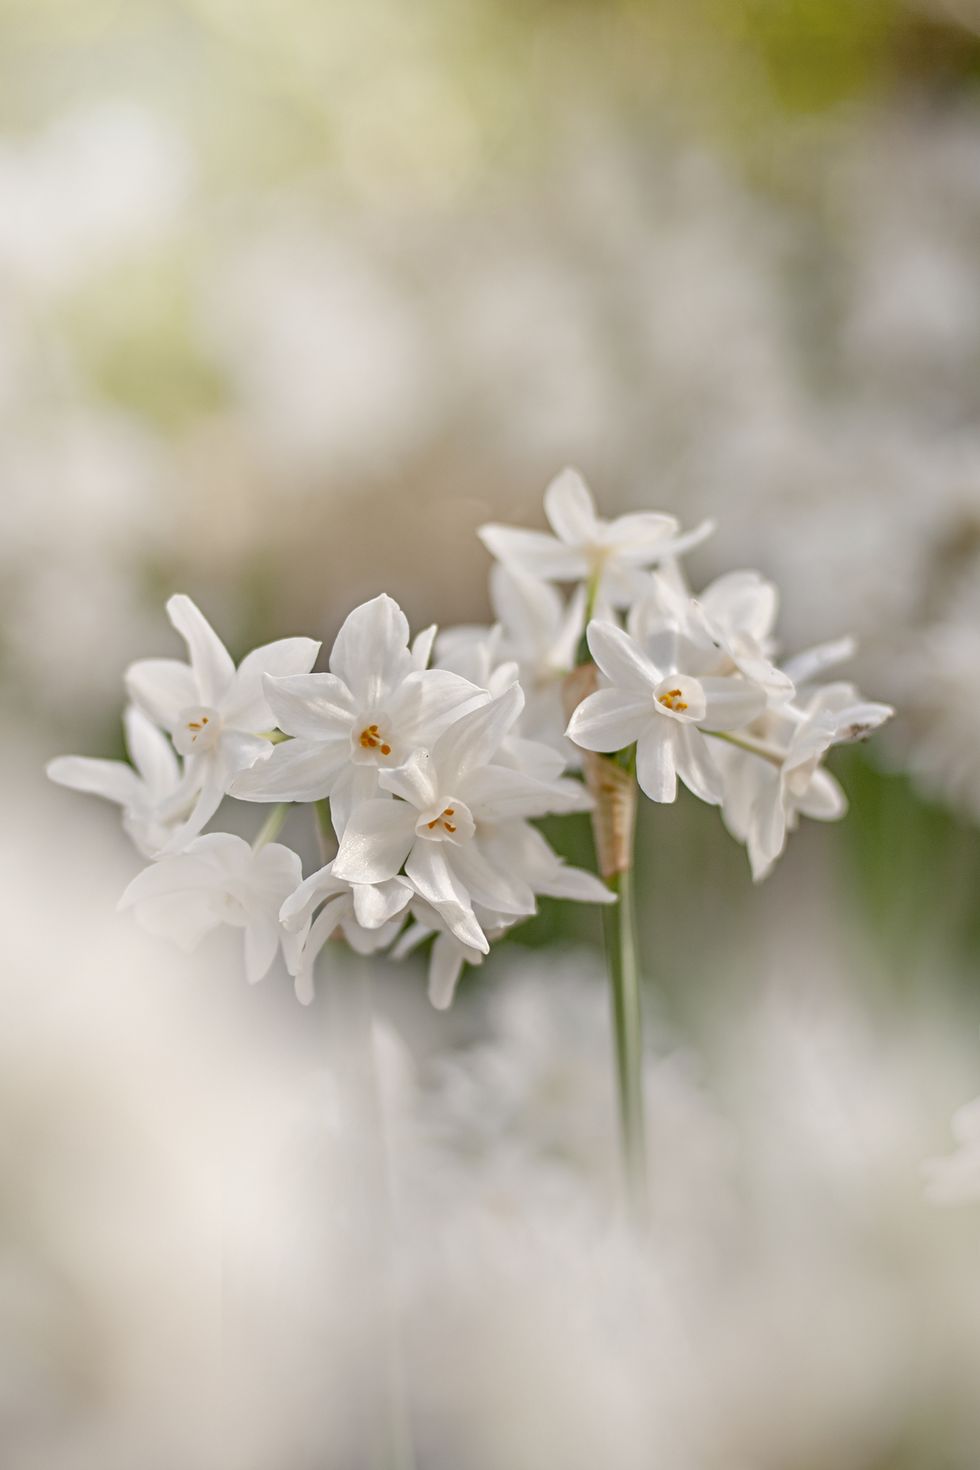 closeup image of the beautiful, scented, spring flowering paperwhite narcissus daffodil flowers